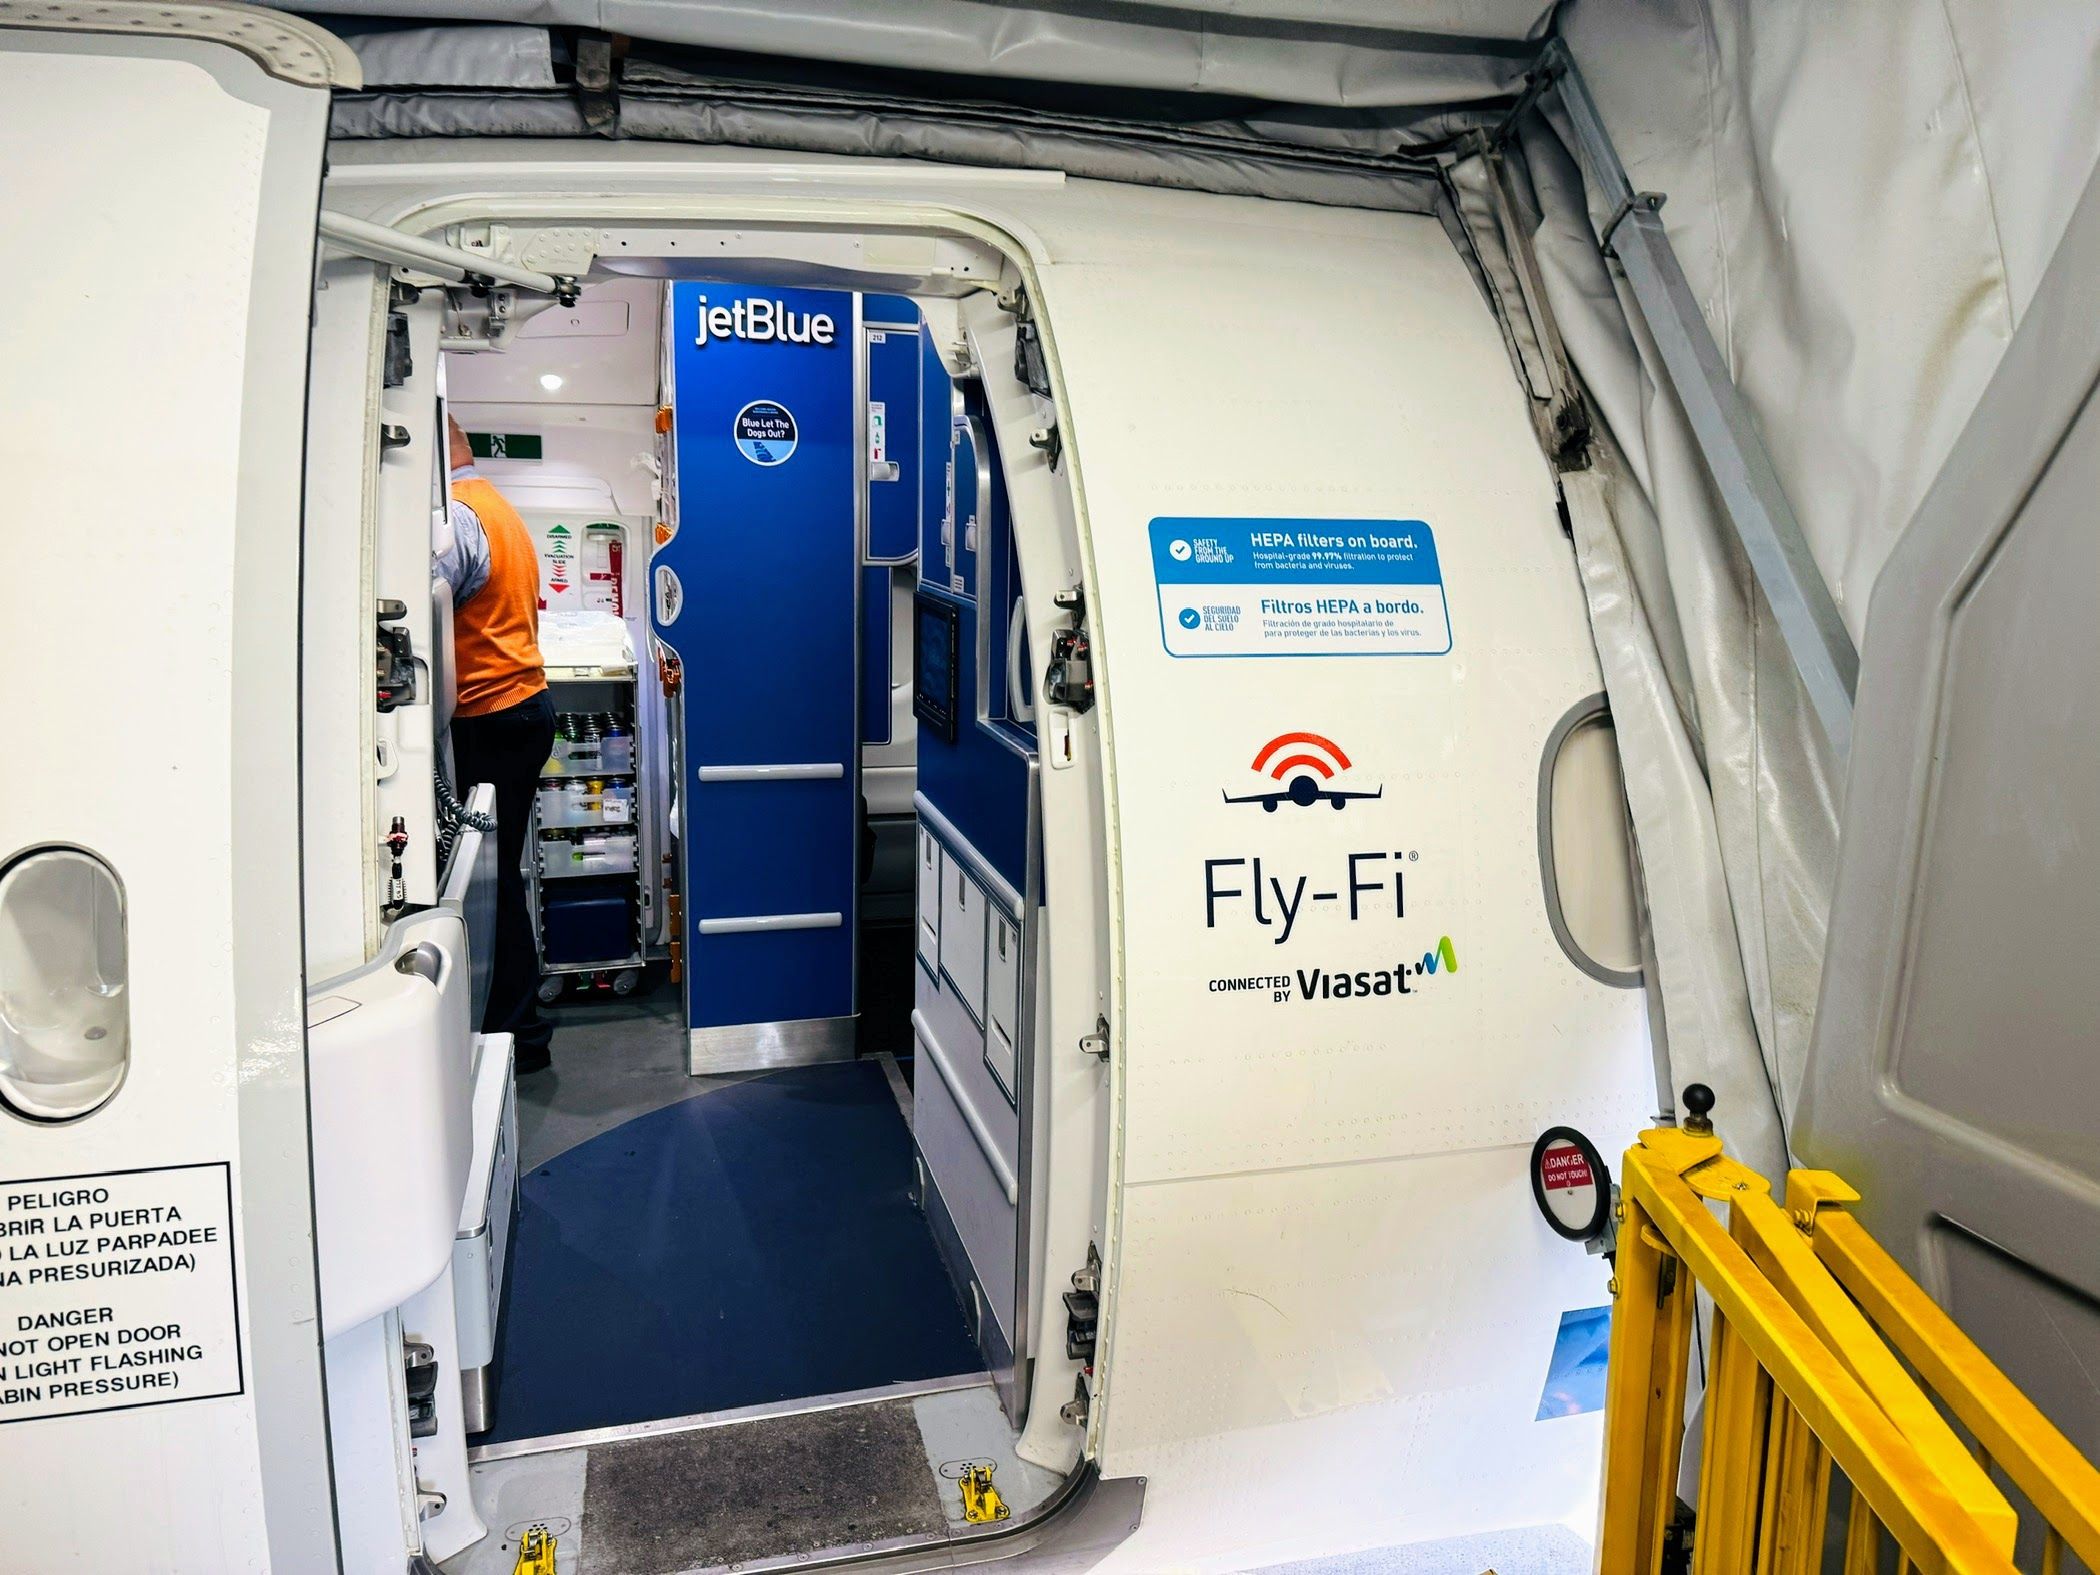 The JetBlue Aircraft name just inside the aircraft